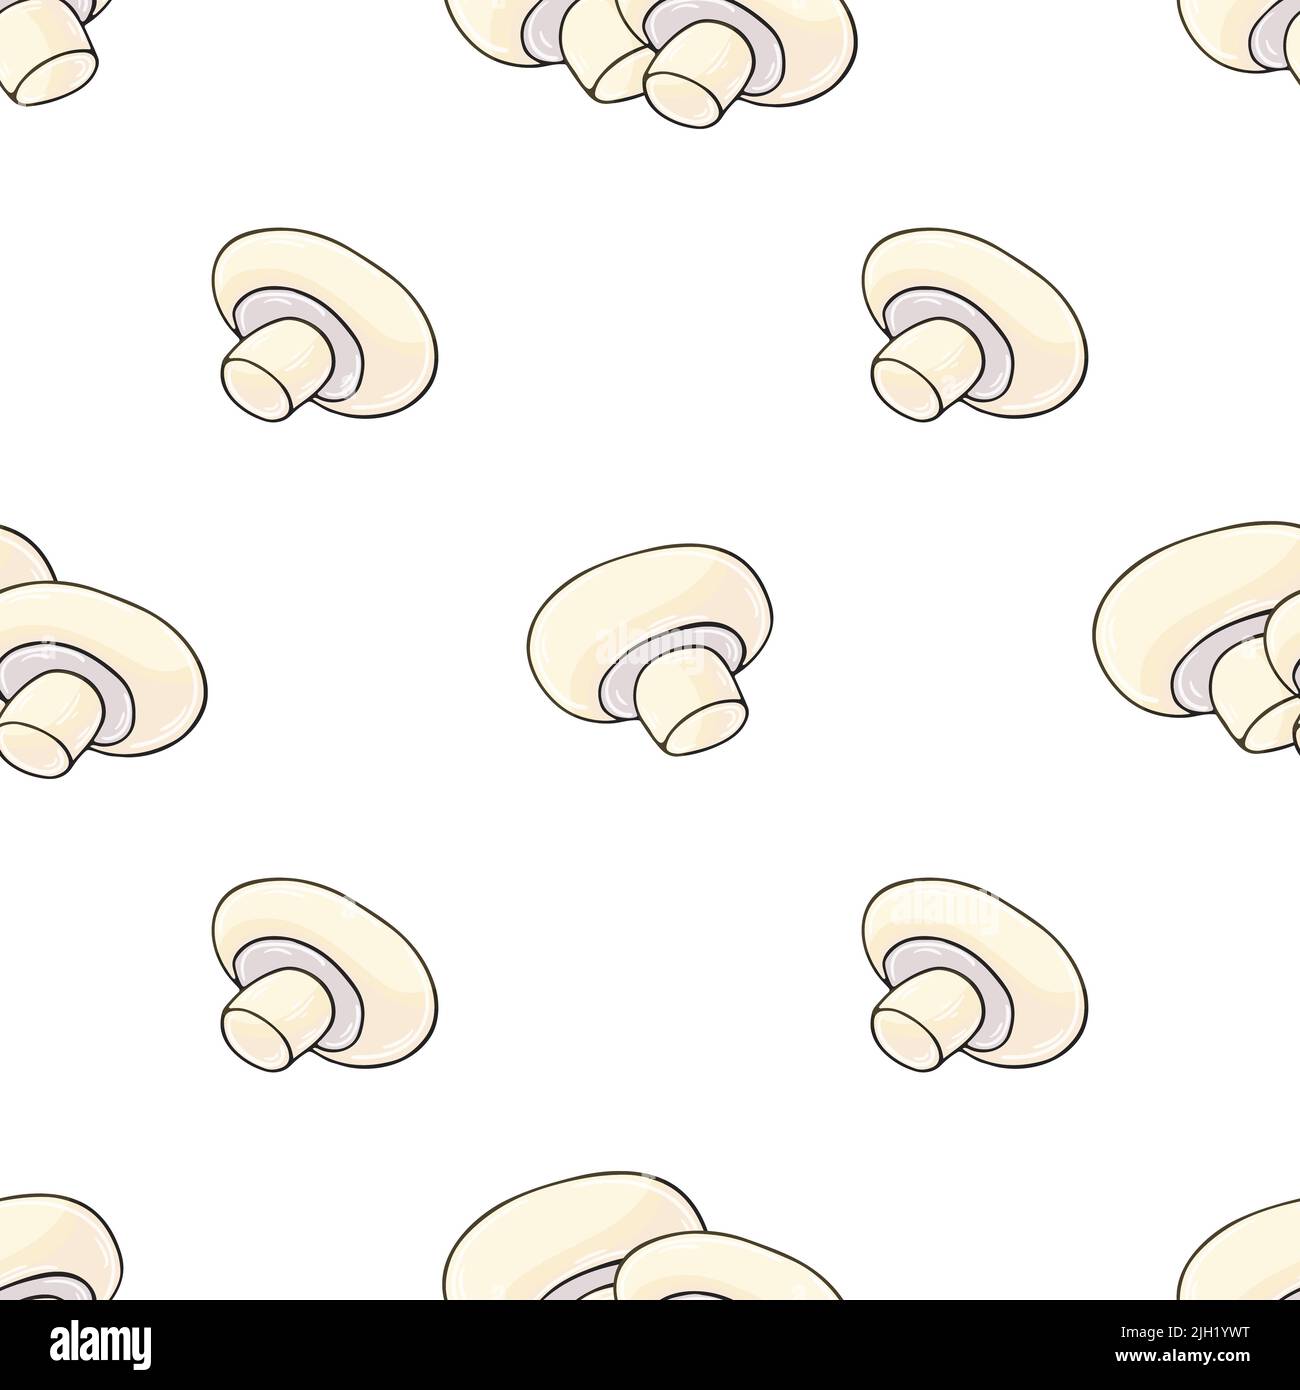 Seamless pattern with forest mushrooms. Illustration in hand draw style. Autumn motives. Champignon. Can be used for fabric, packaging, wrapping paper Stock Vector